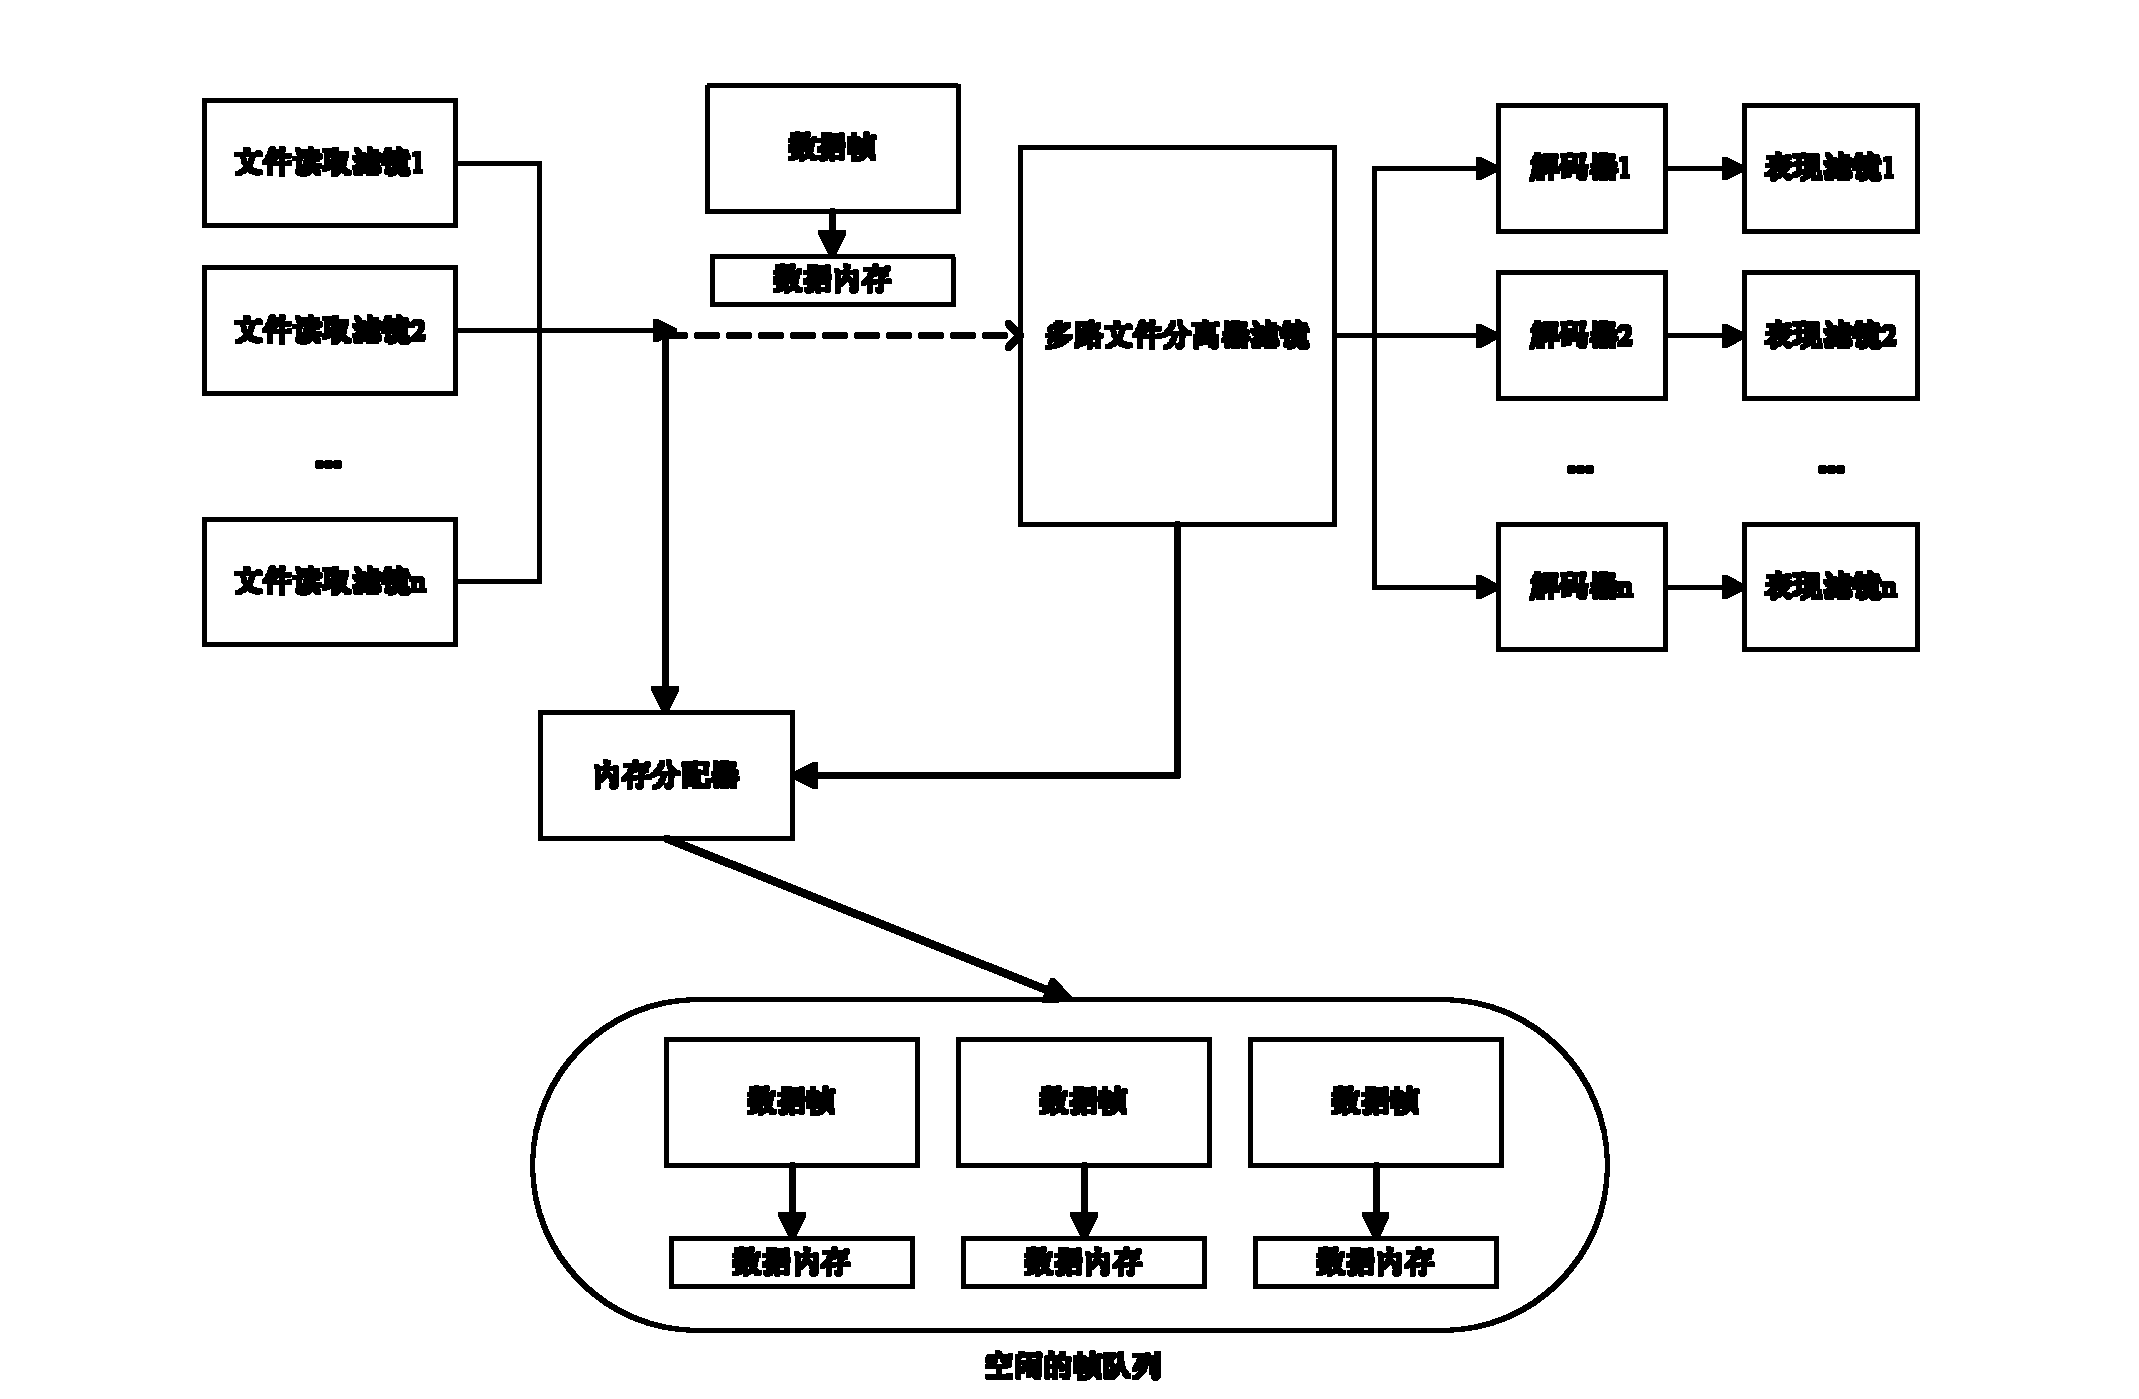 Synchronous replay system for multi-channel audio and video and method thereof